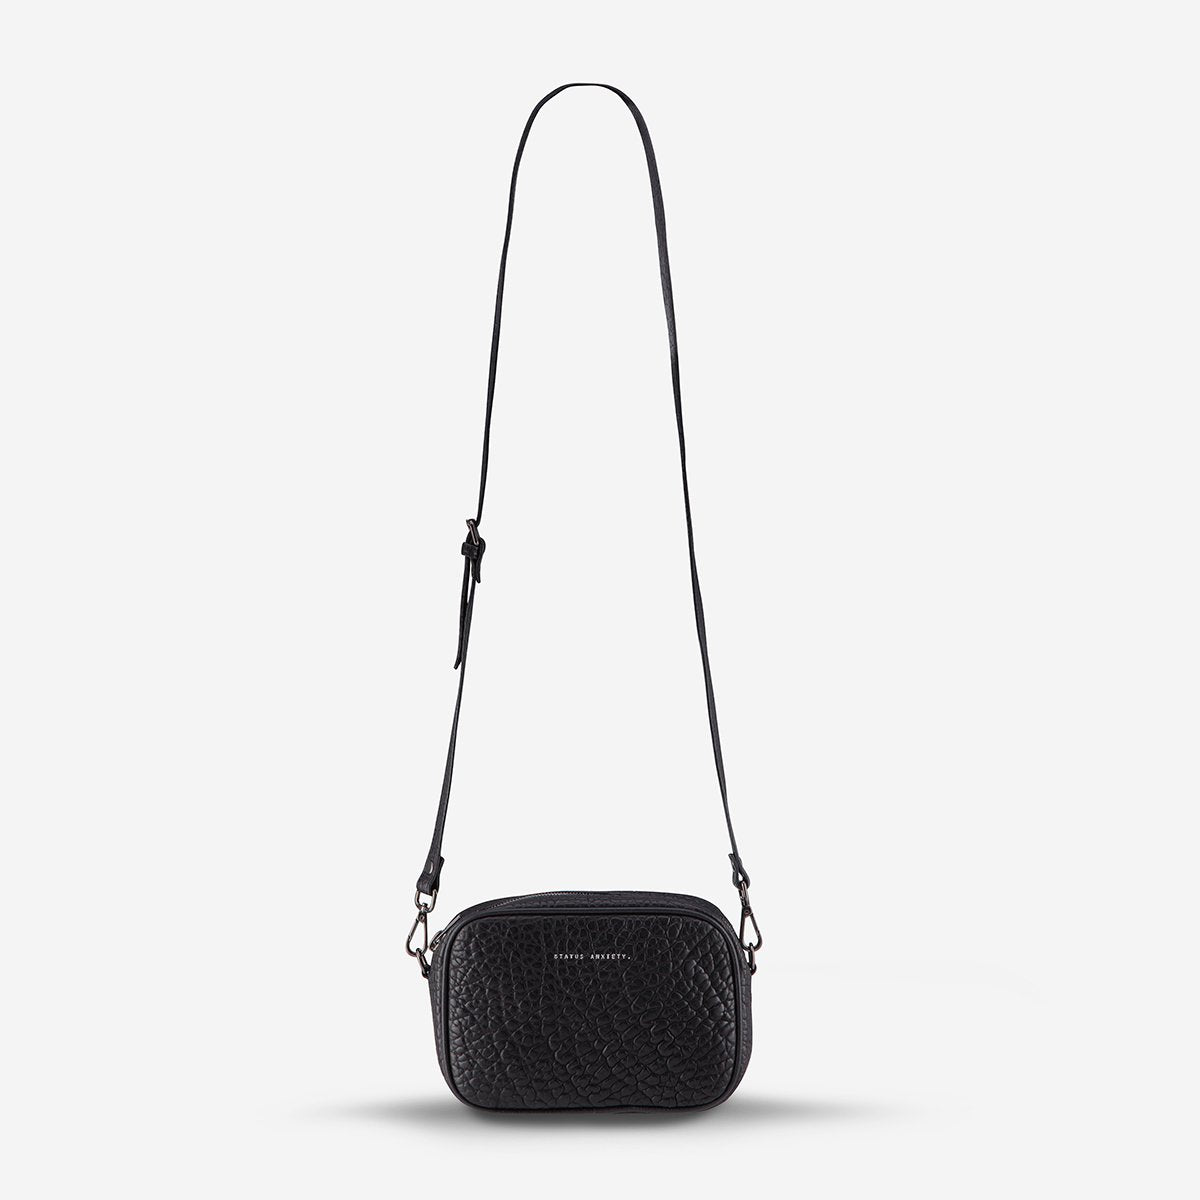 STATUS ANXIETY PLUNDER BAG BLACK BUBBLE